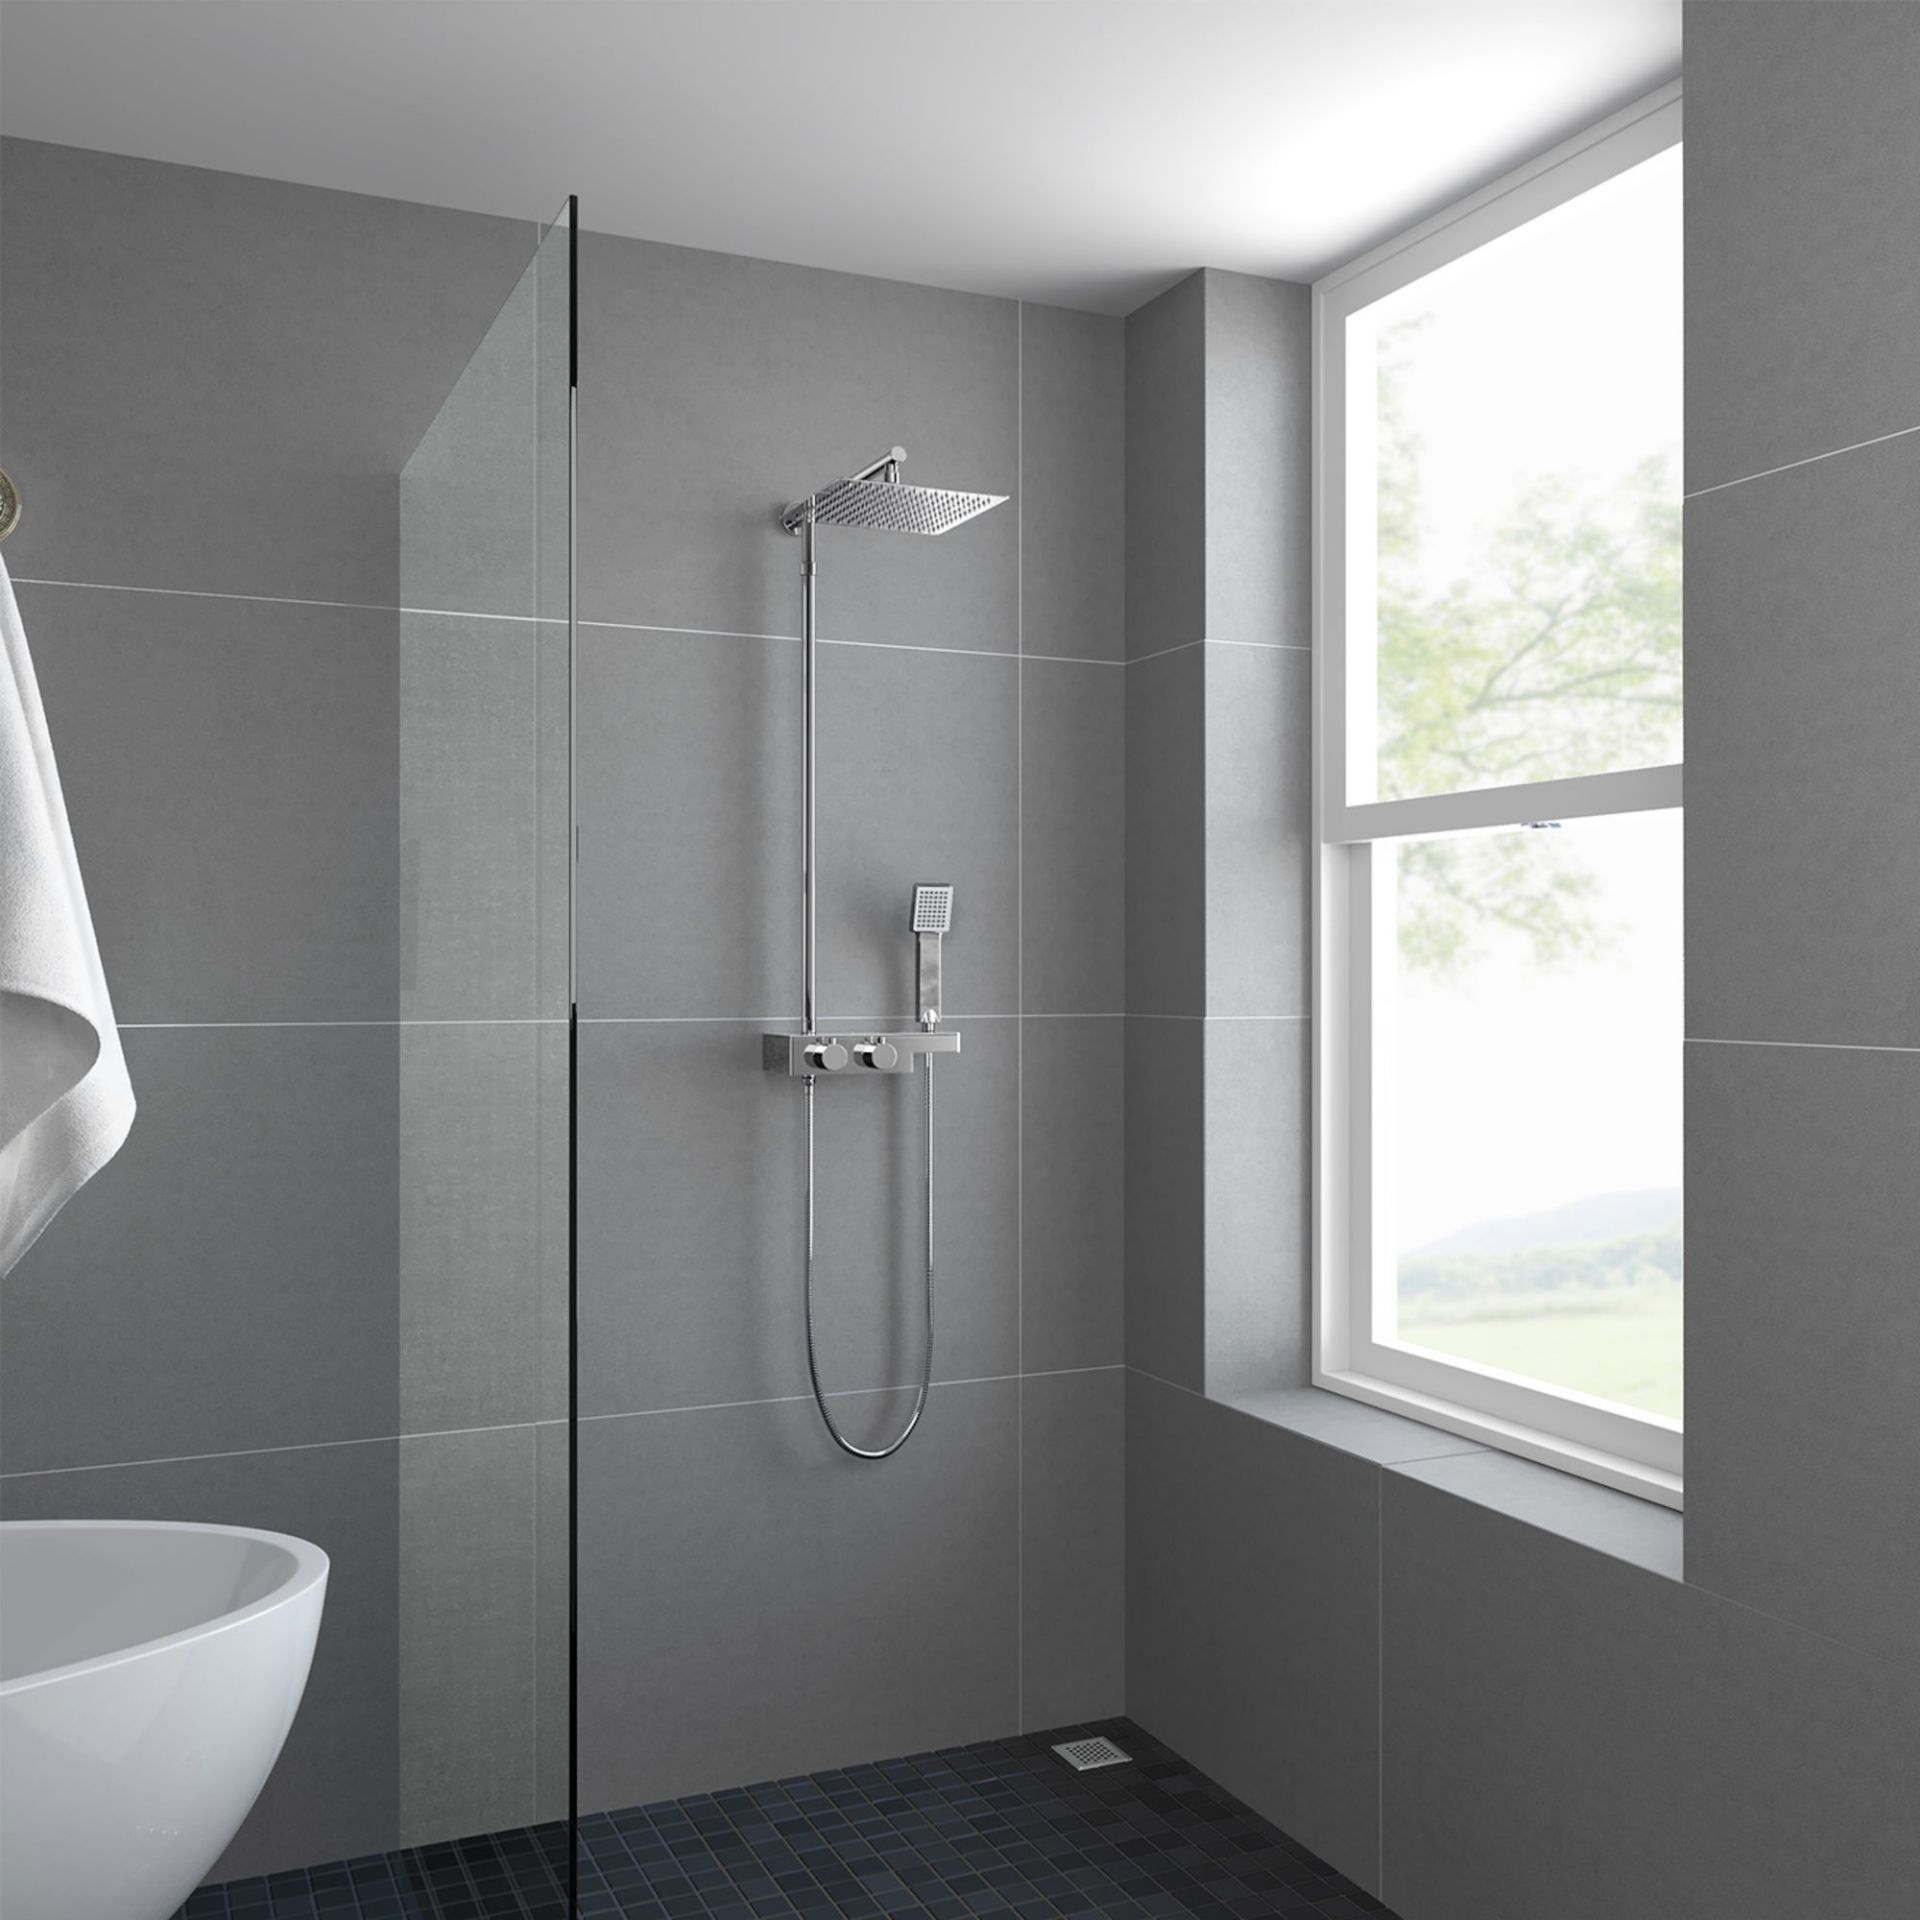 (YC31) Square Exposed Thermostatic Shower Shelf, Kit & Large Head. Style meets function with our